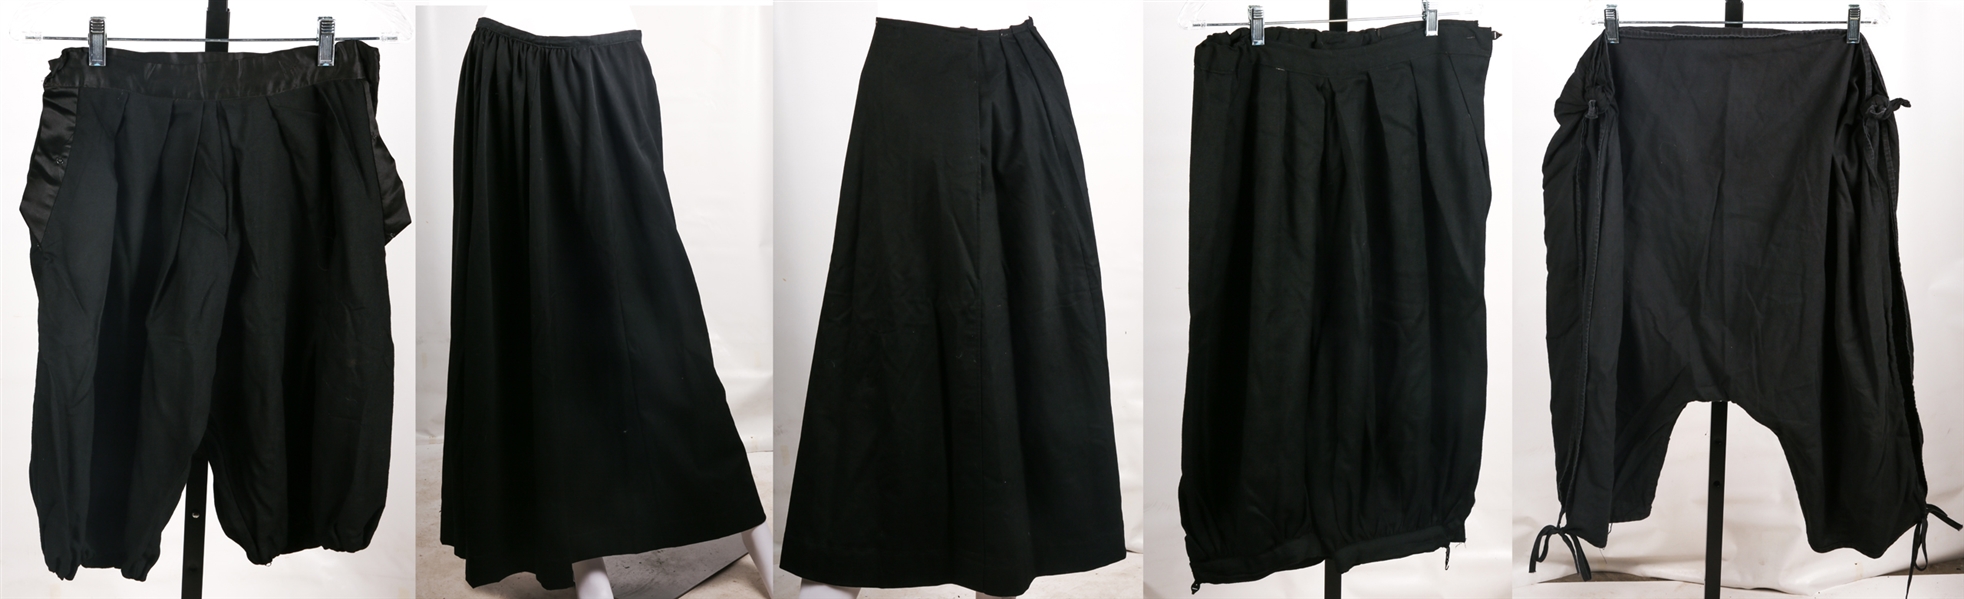 20TH C. WOMENS BLACK SKIRTS & KNICKERS LOT OF 5